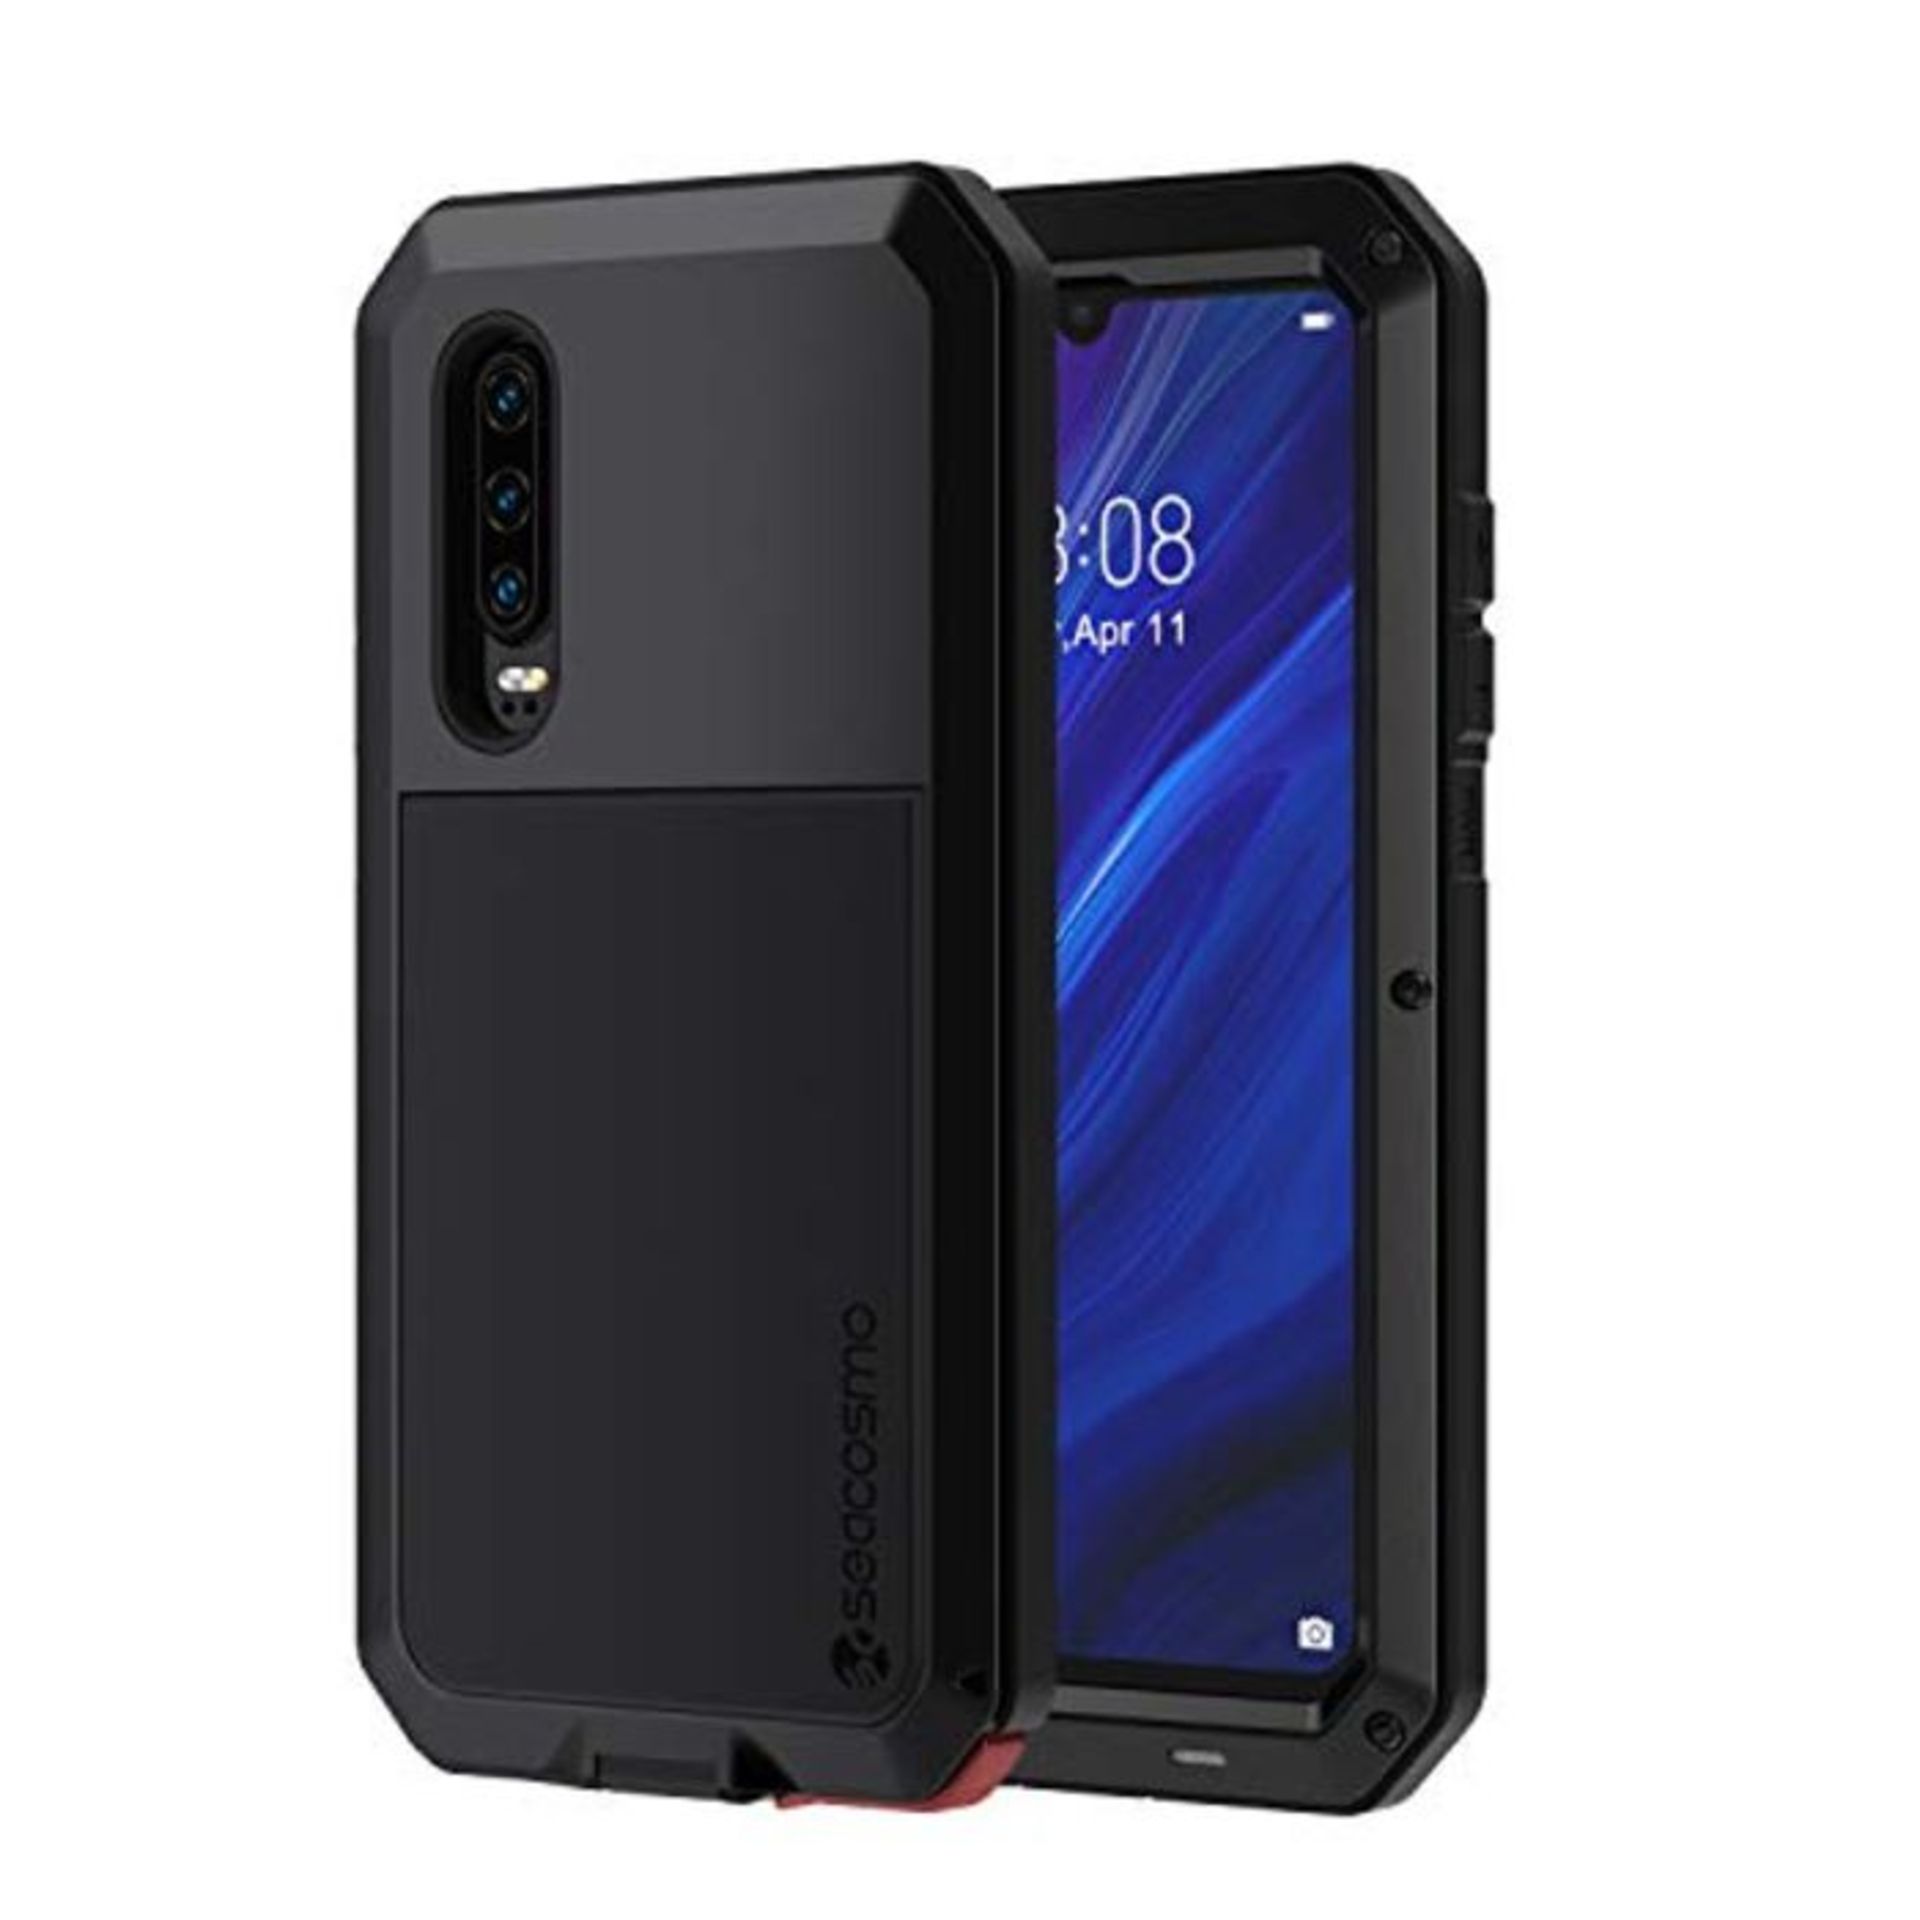 seacosmo Huawei P30 Case, Heavy Duty Metal Case [with Screen Protector] Full Body Shoc